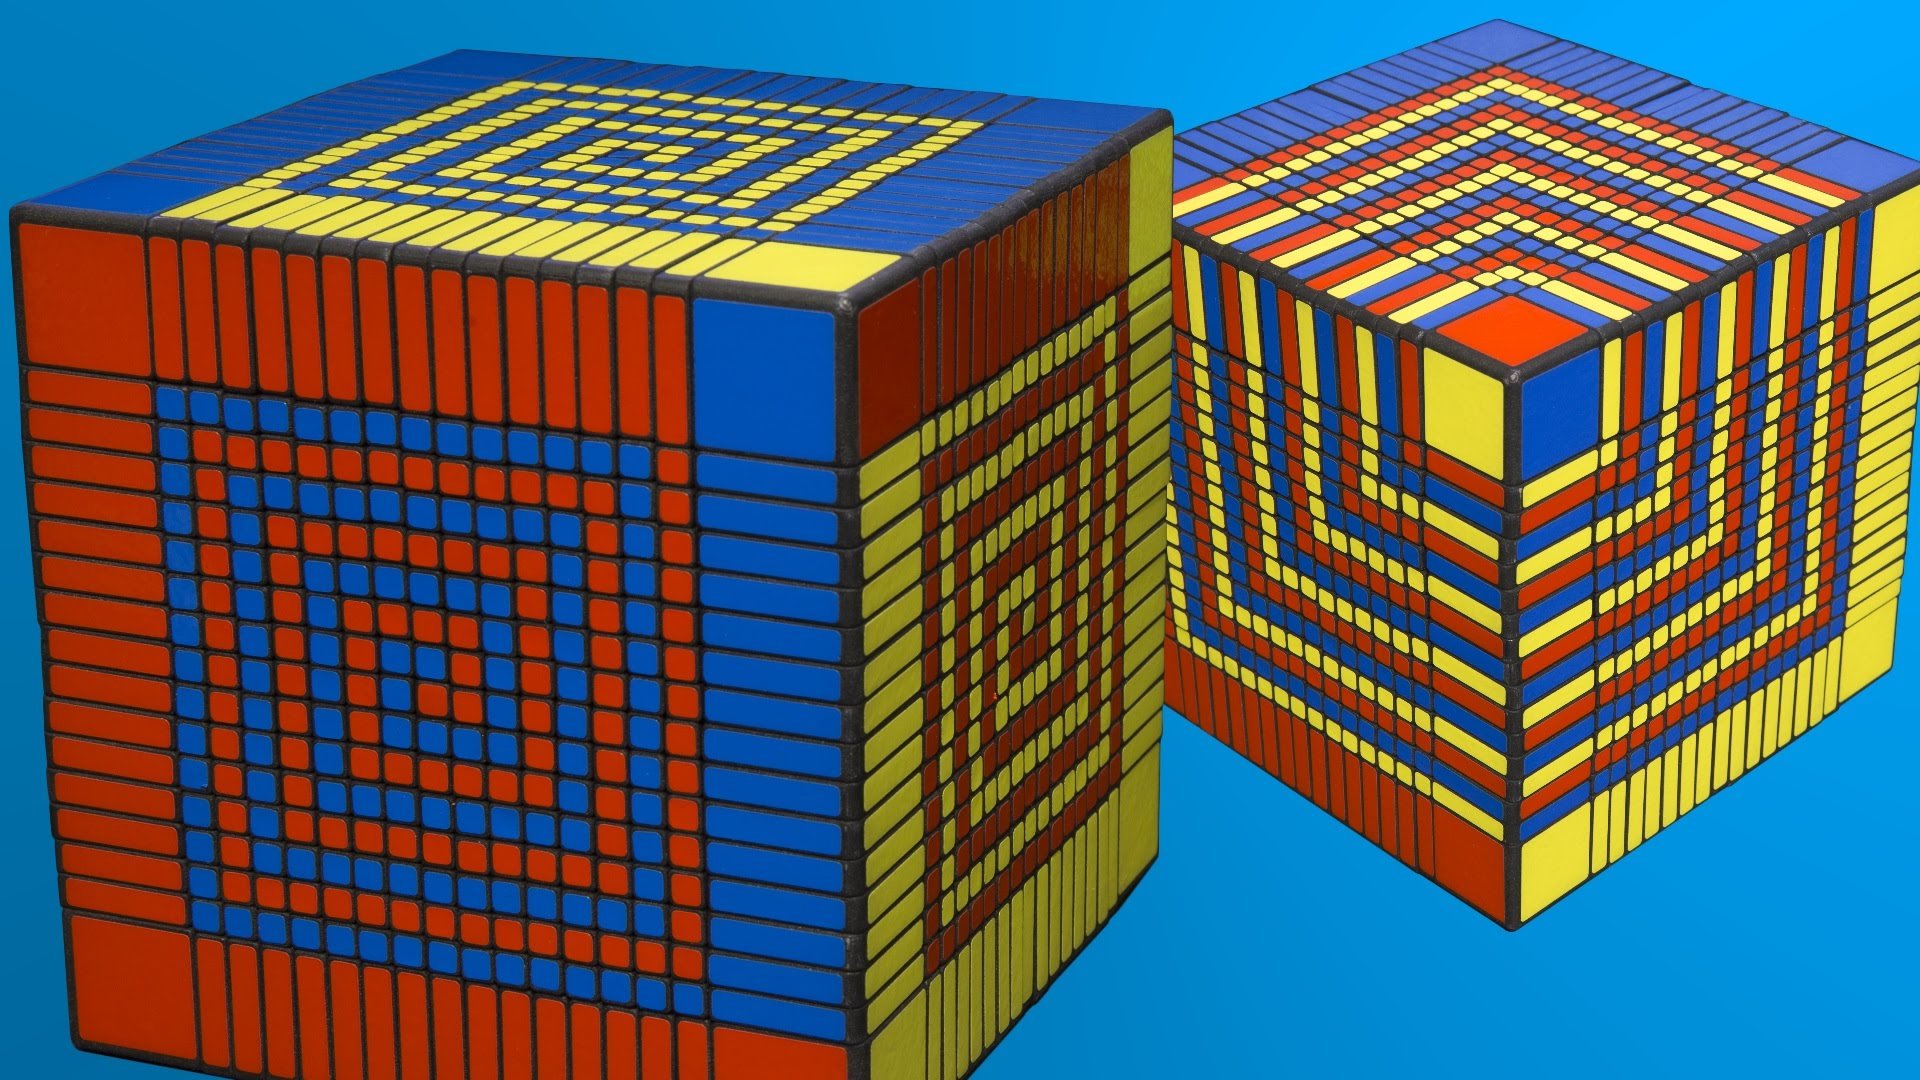 SOLVED: The World’s Largest Rubik’s Cube